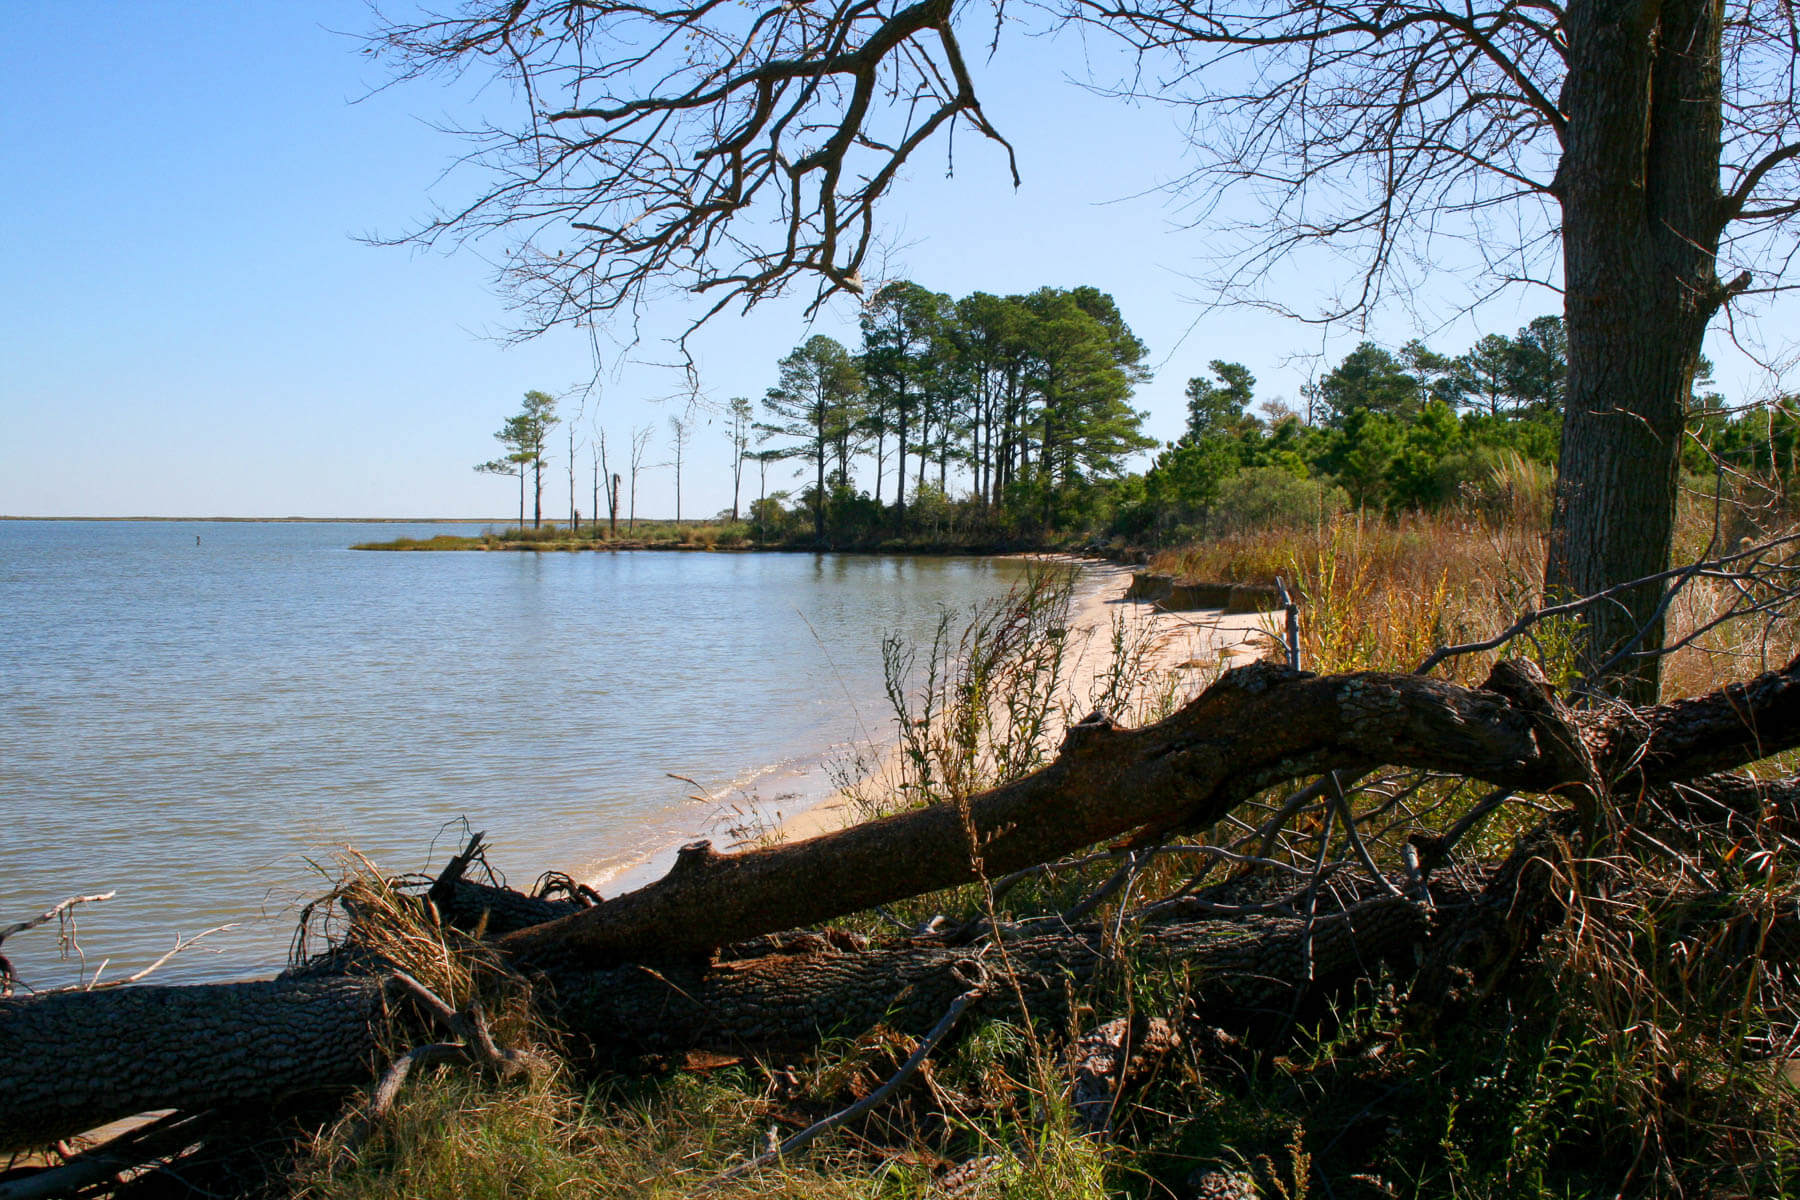 Wetland's beach area with a fallen tree in the foreground